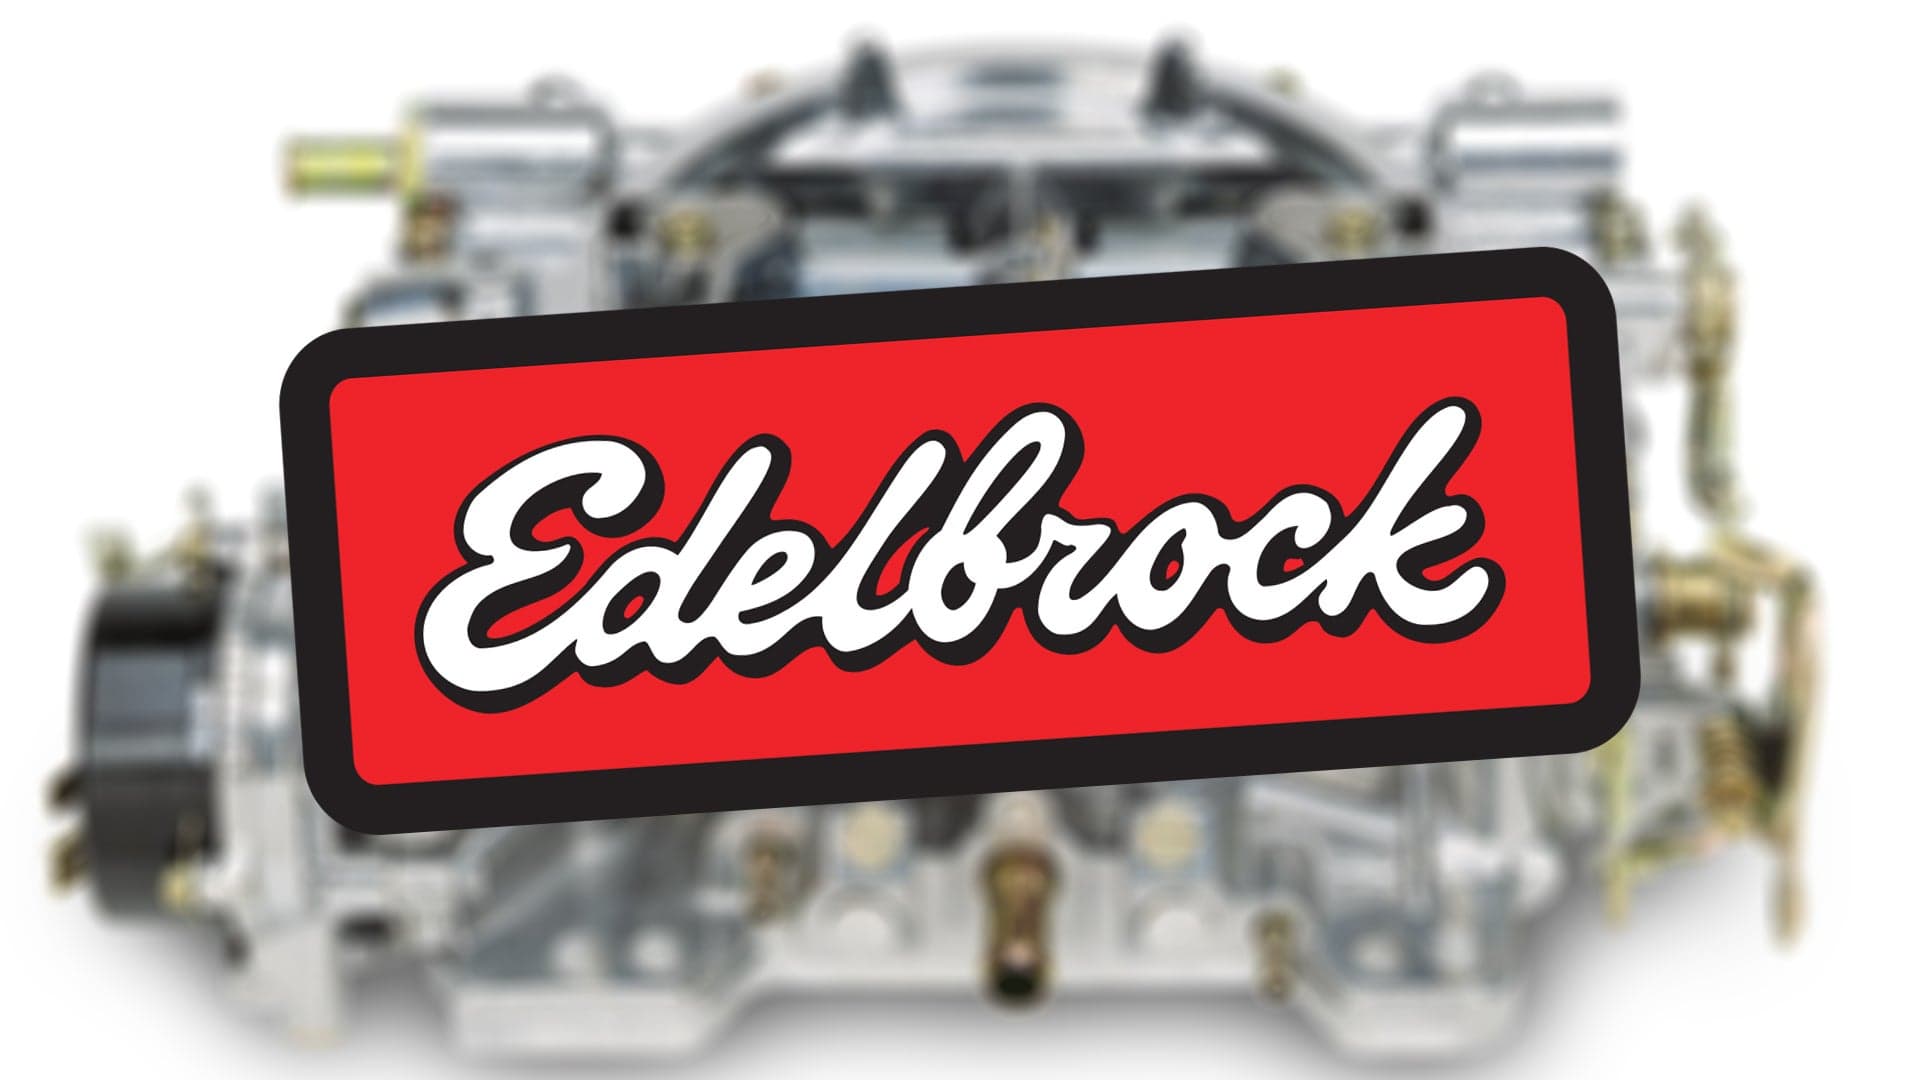 Edelbrock Is Leaving California Partly Because SpaceX Hires Too Many Machinists